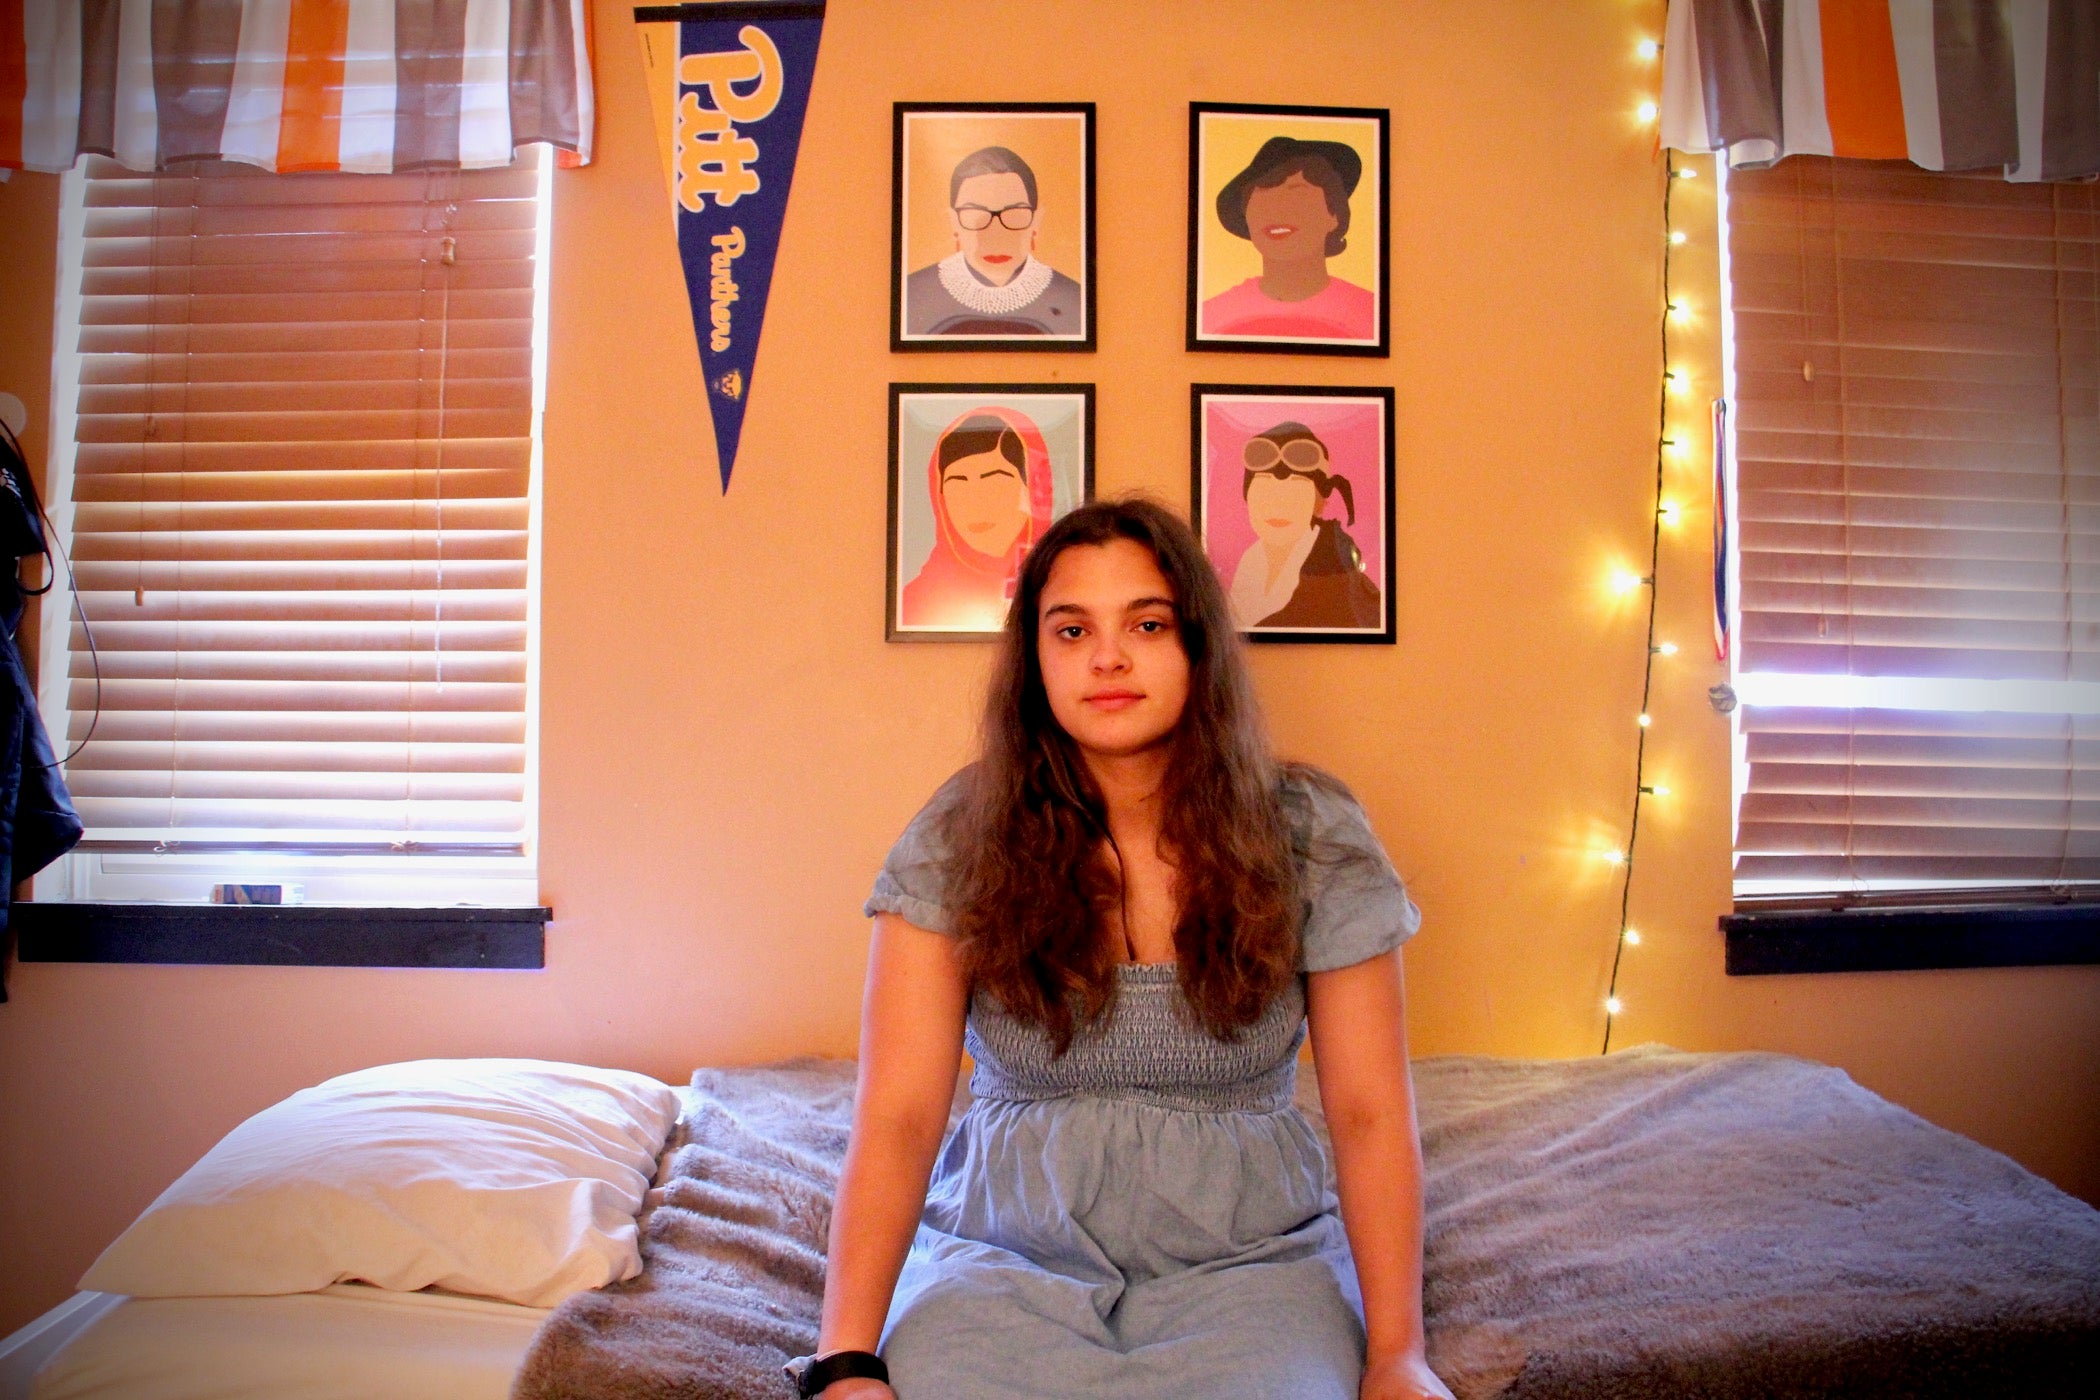 A mixed race teenager with long, brown hair sits on her bed. Four framed illustrations of Ruth Bader Ginsburg, Zora Neale Hurston, Malala Yousafzai and Amelia Earhart and a University of Pittsburgh pennant decorate the wall behind her.